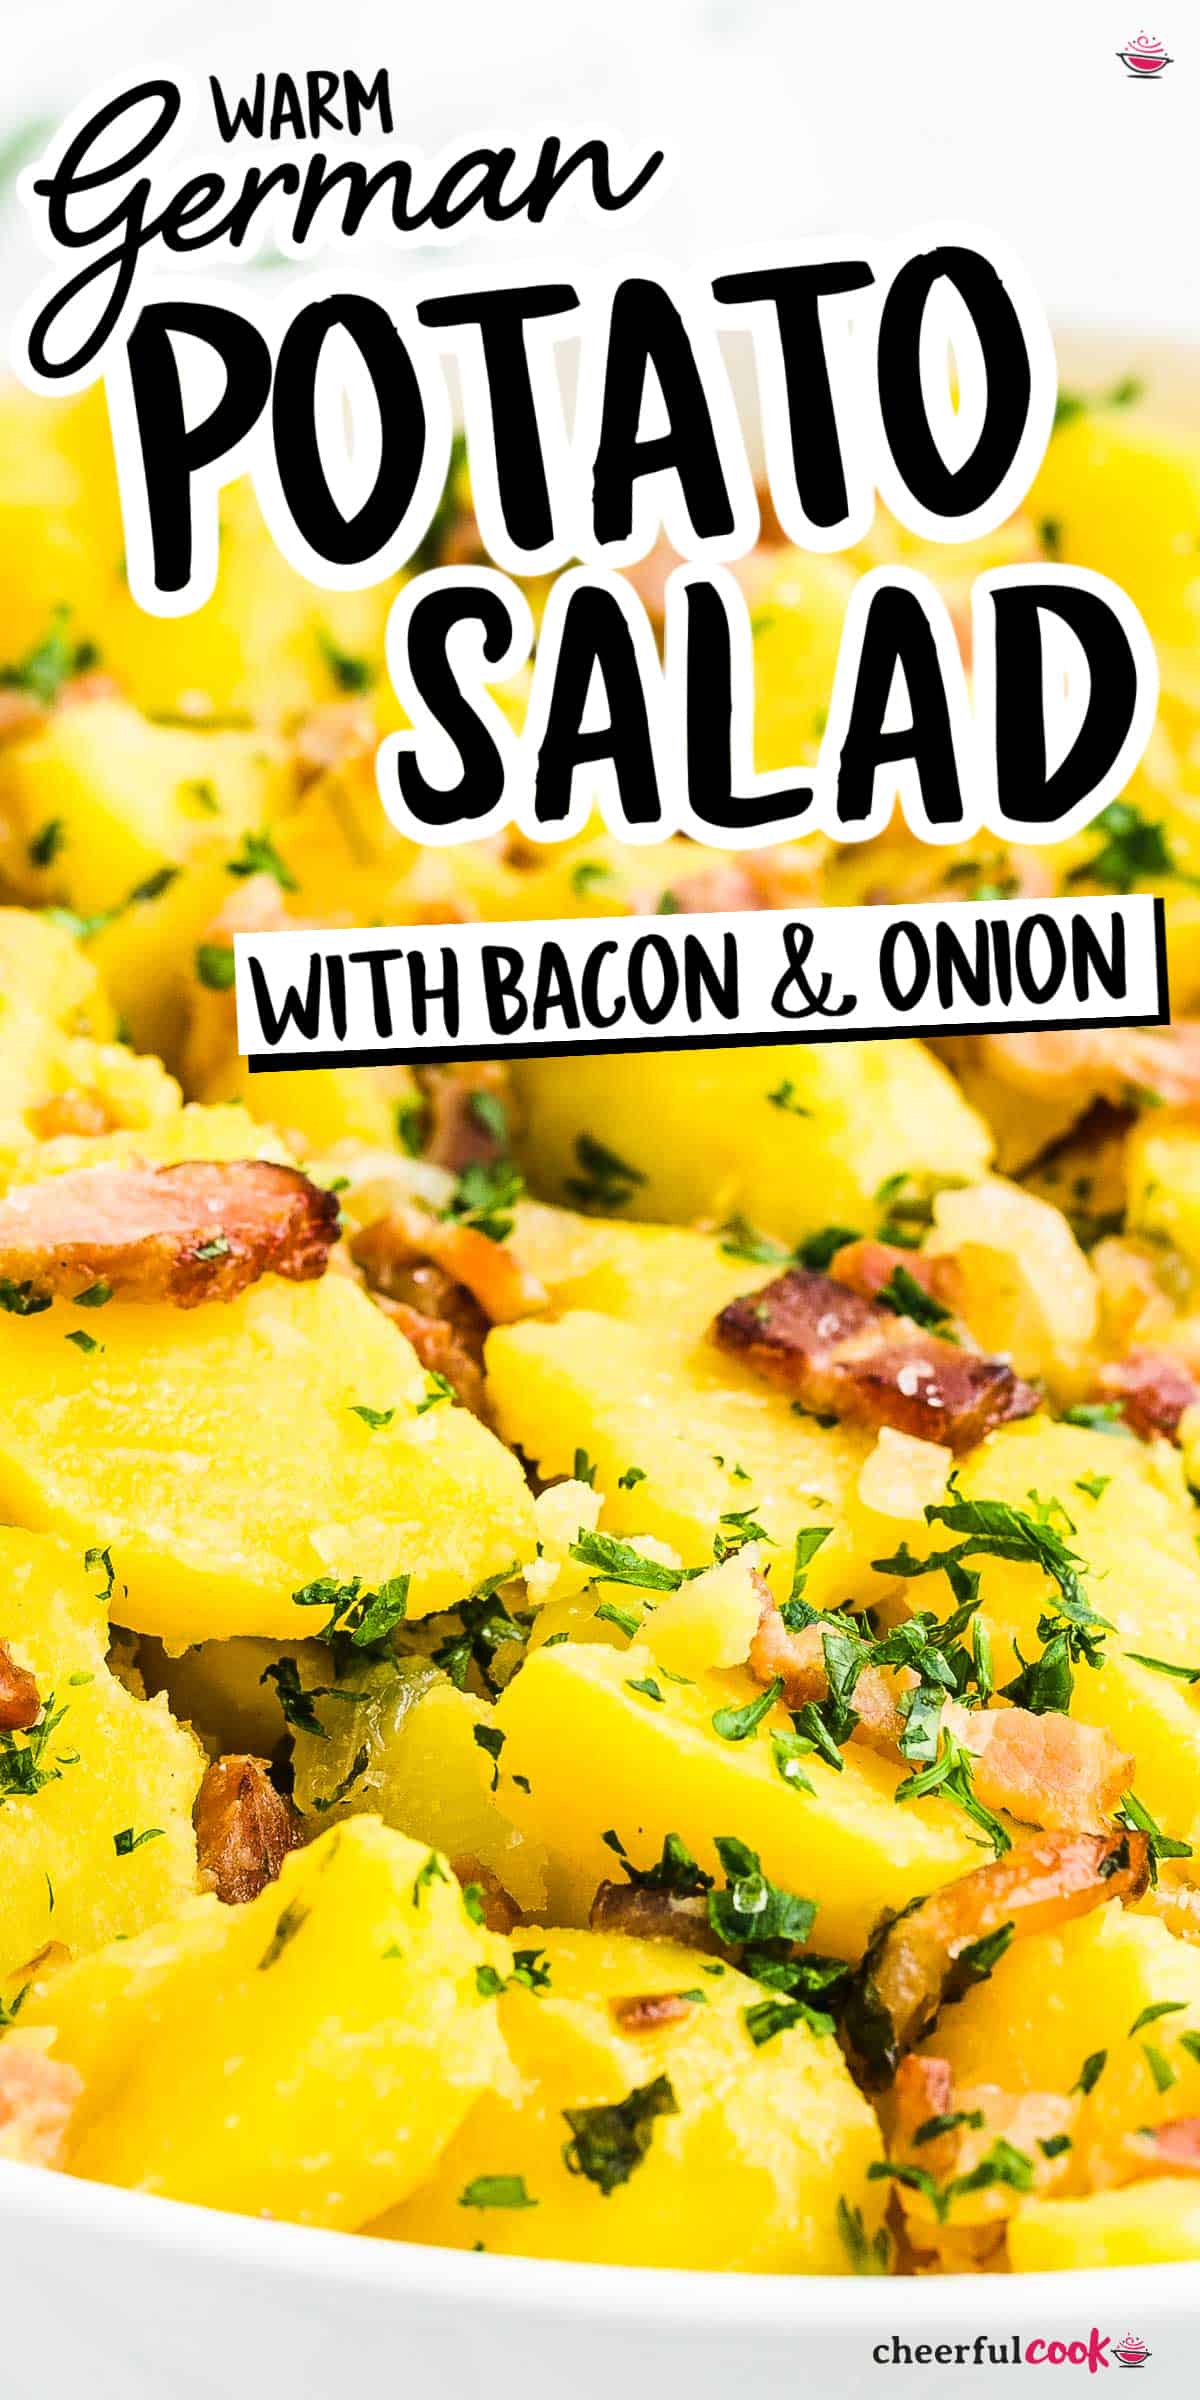 THE BEST German Potato Salad ~ a warm potato salad recipe that can be served as a main dish or a side dish! Warm potatoes are topped with a smoky, sweet, and tangy bacon dressing and lots of crispy bacon. Perfect for picnics, potlucks, or barbecues! #cheerfulcook #germanpotatosalad #warmpotatosalad #hotgermanpotatosalad #bacon #warmerkartoffelsalat | cheerfulcook.com via @cheerfulcook